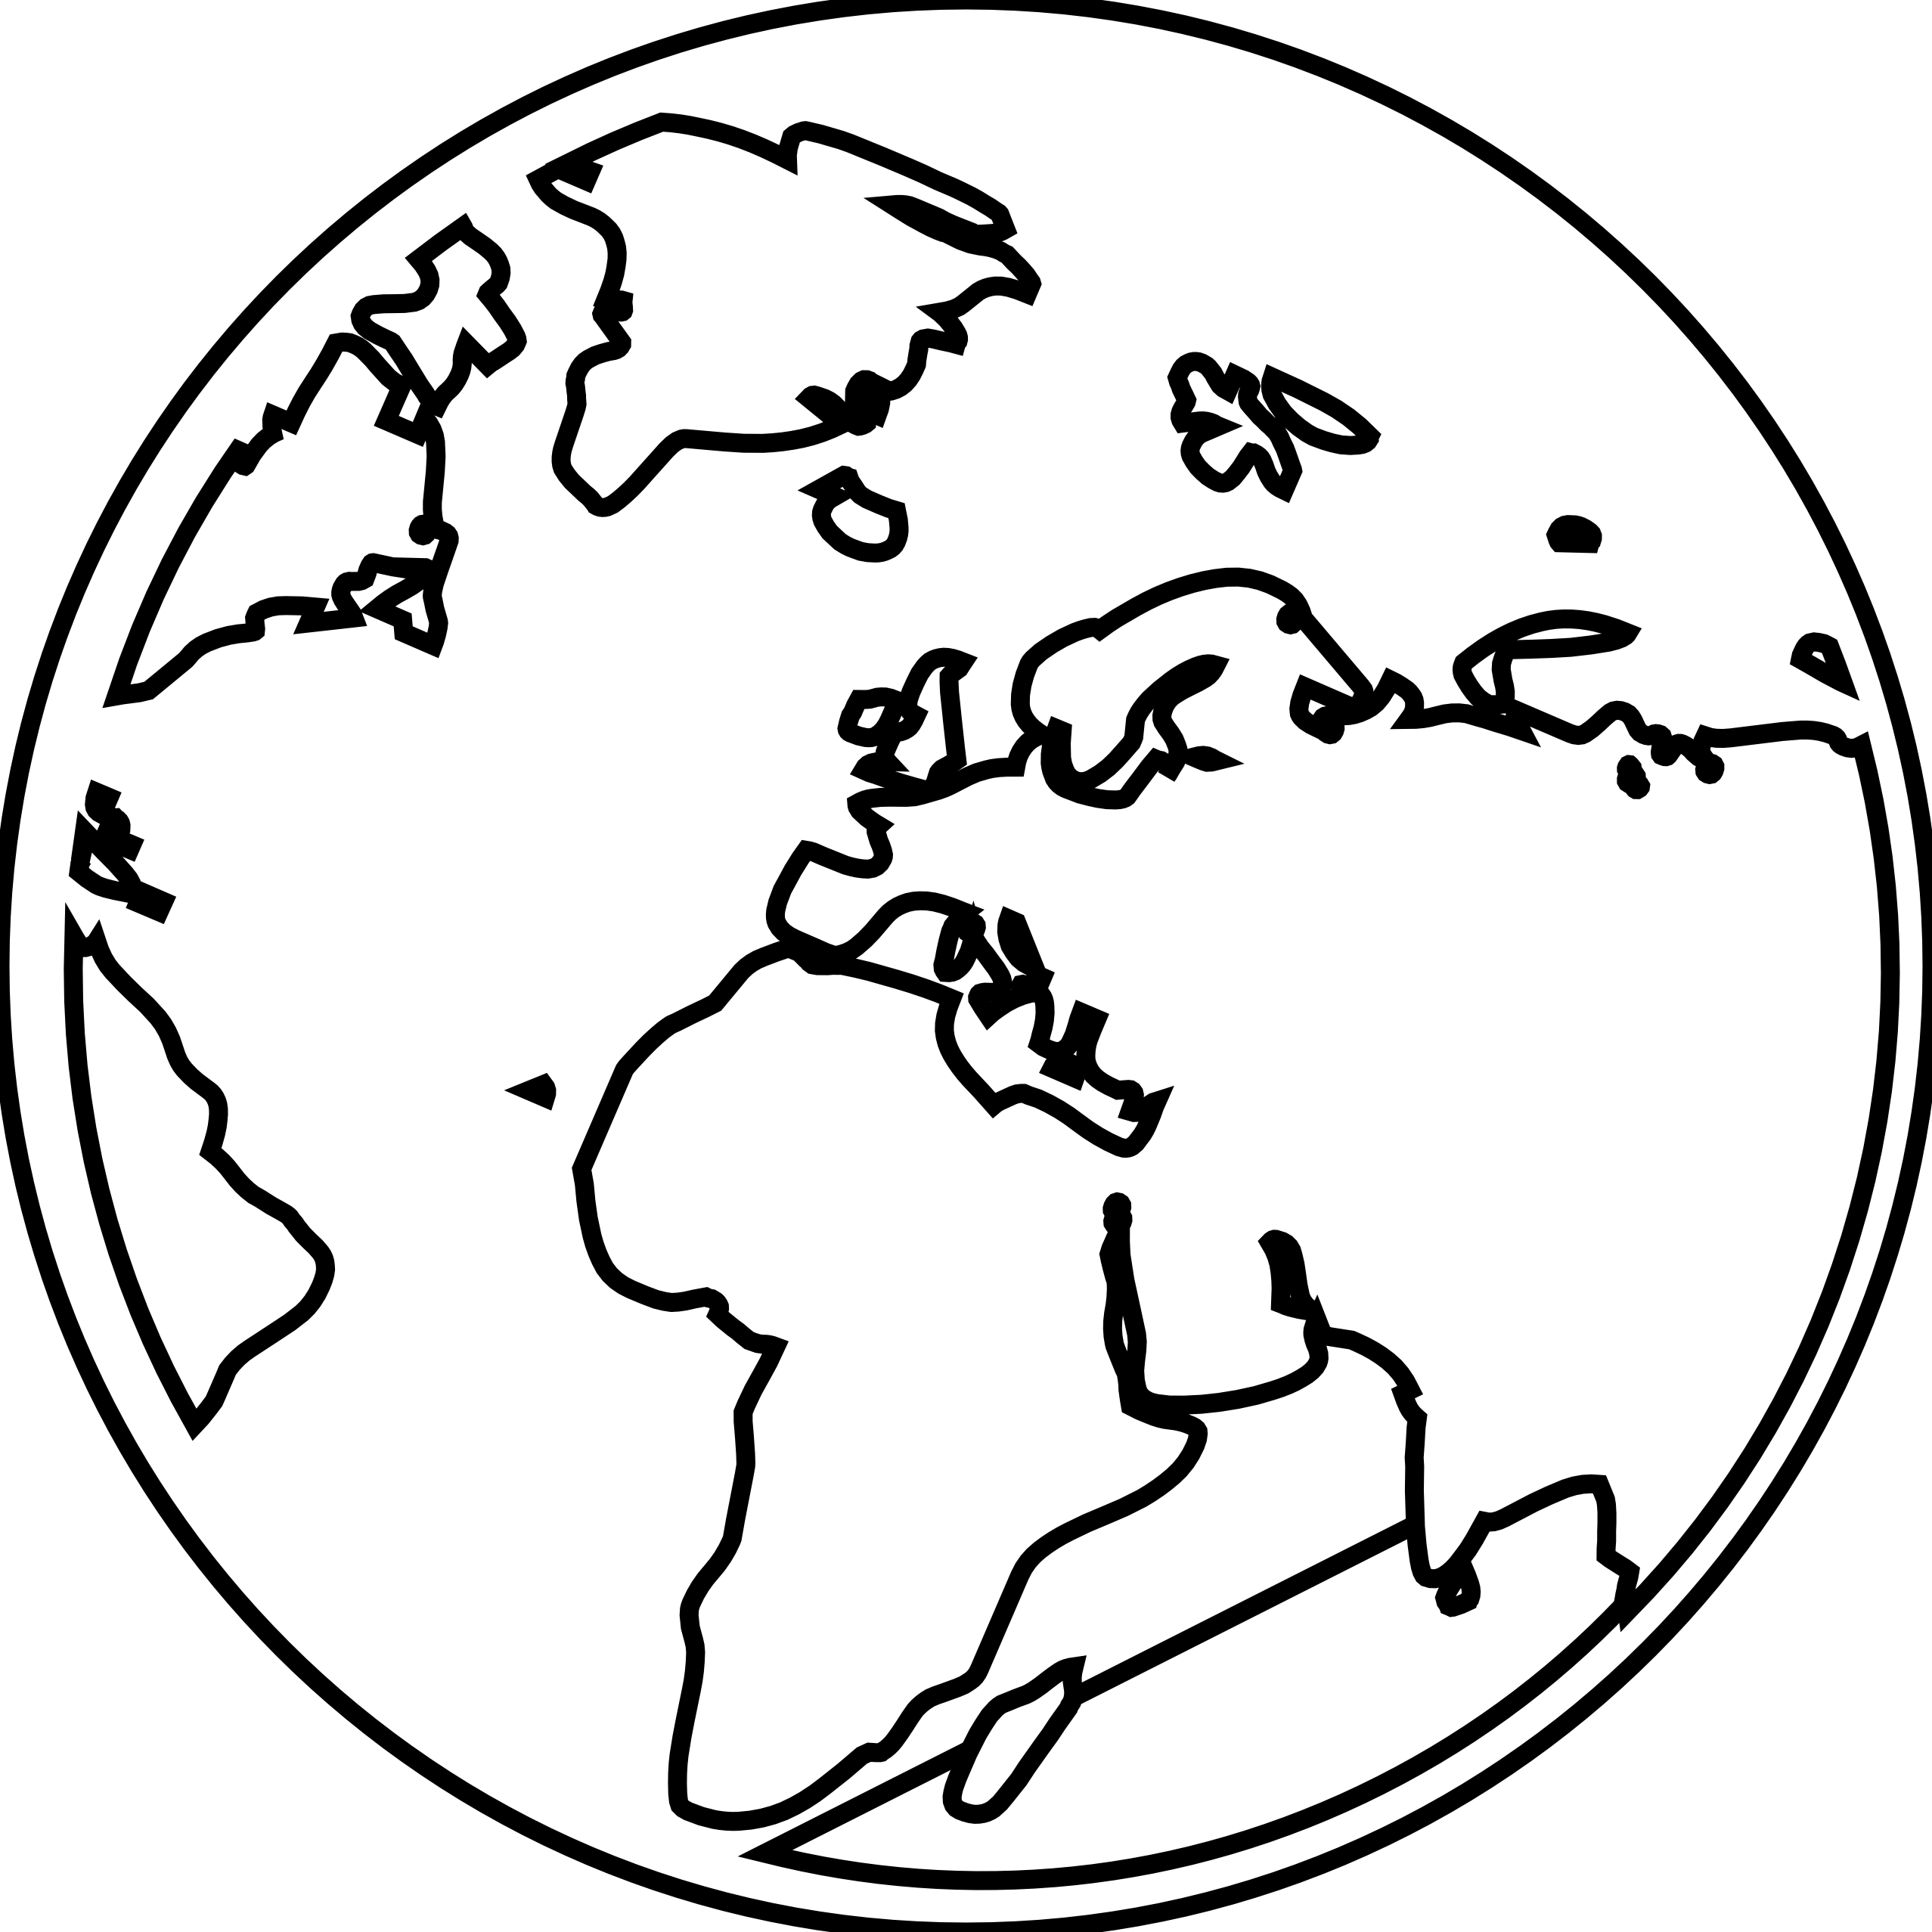 Free Black And White Earth, Download Free Clip Art, Free ...